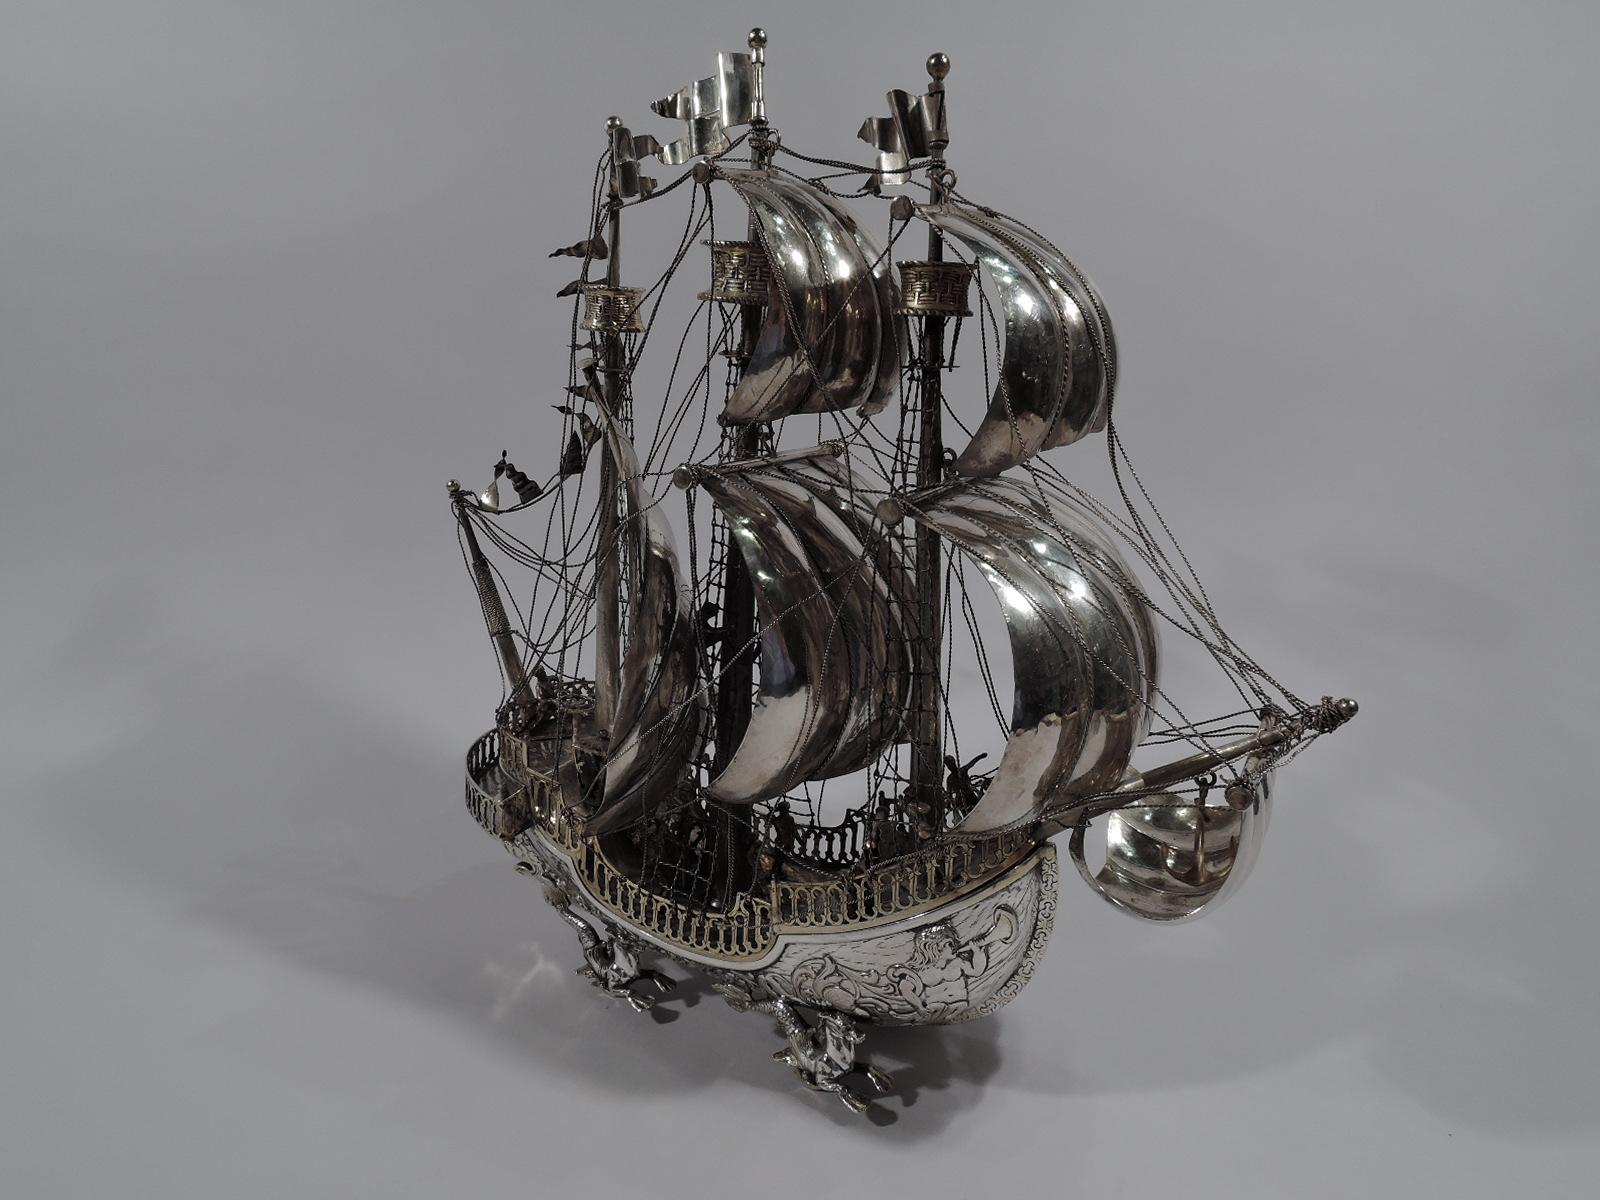 Turn-of-the-century German sterling silver 3-mast galleon nef. Imported to England by Lionel Spiers in London in 1924. Sides have finely delineated “wood” planks decorated with conch-blowing figures and flowery scrolls. Deck also “wood” with mounted